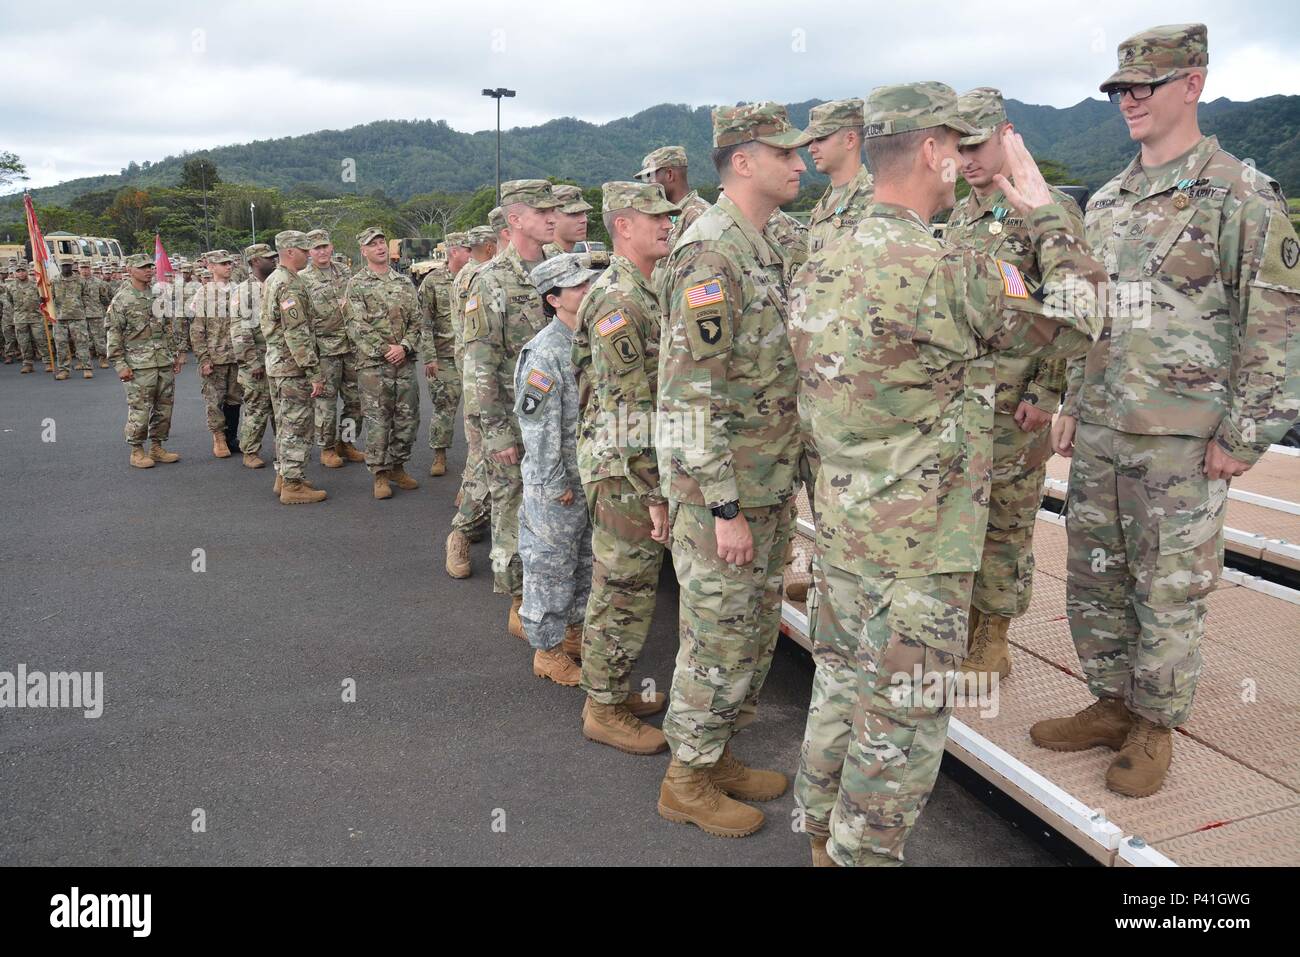 WAHIAWA, Hawaii – During a Materiel Readiness Award Ceremony, here, more than 70 Soldiers and civilians receive awards and/or brigade coins for their contributions during the Stryker turn-in process on June 1, 2016. Brigadier Gen. Patrick Matlock, 25th Infantry Division’s Deputy Commanding General-Support joined Col. David Womack, Command Sgt. Maj. T.J. Holland, the command team for 2nd Inf. Bde. Combat Team, and the rest of the Warrior Brigade Battalion’s Command Teams, as they praised the Soldiers for their hard-work and dedication during the transition process. Stock Photo